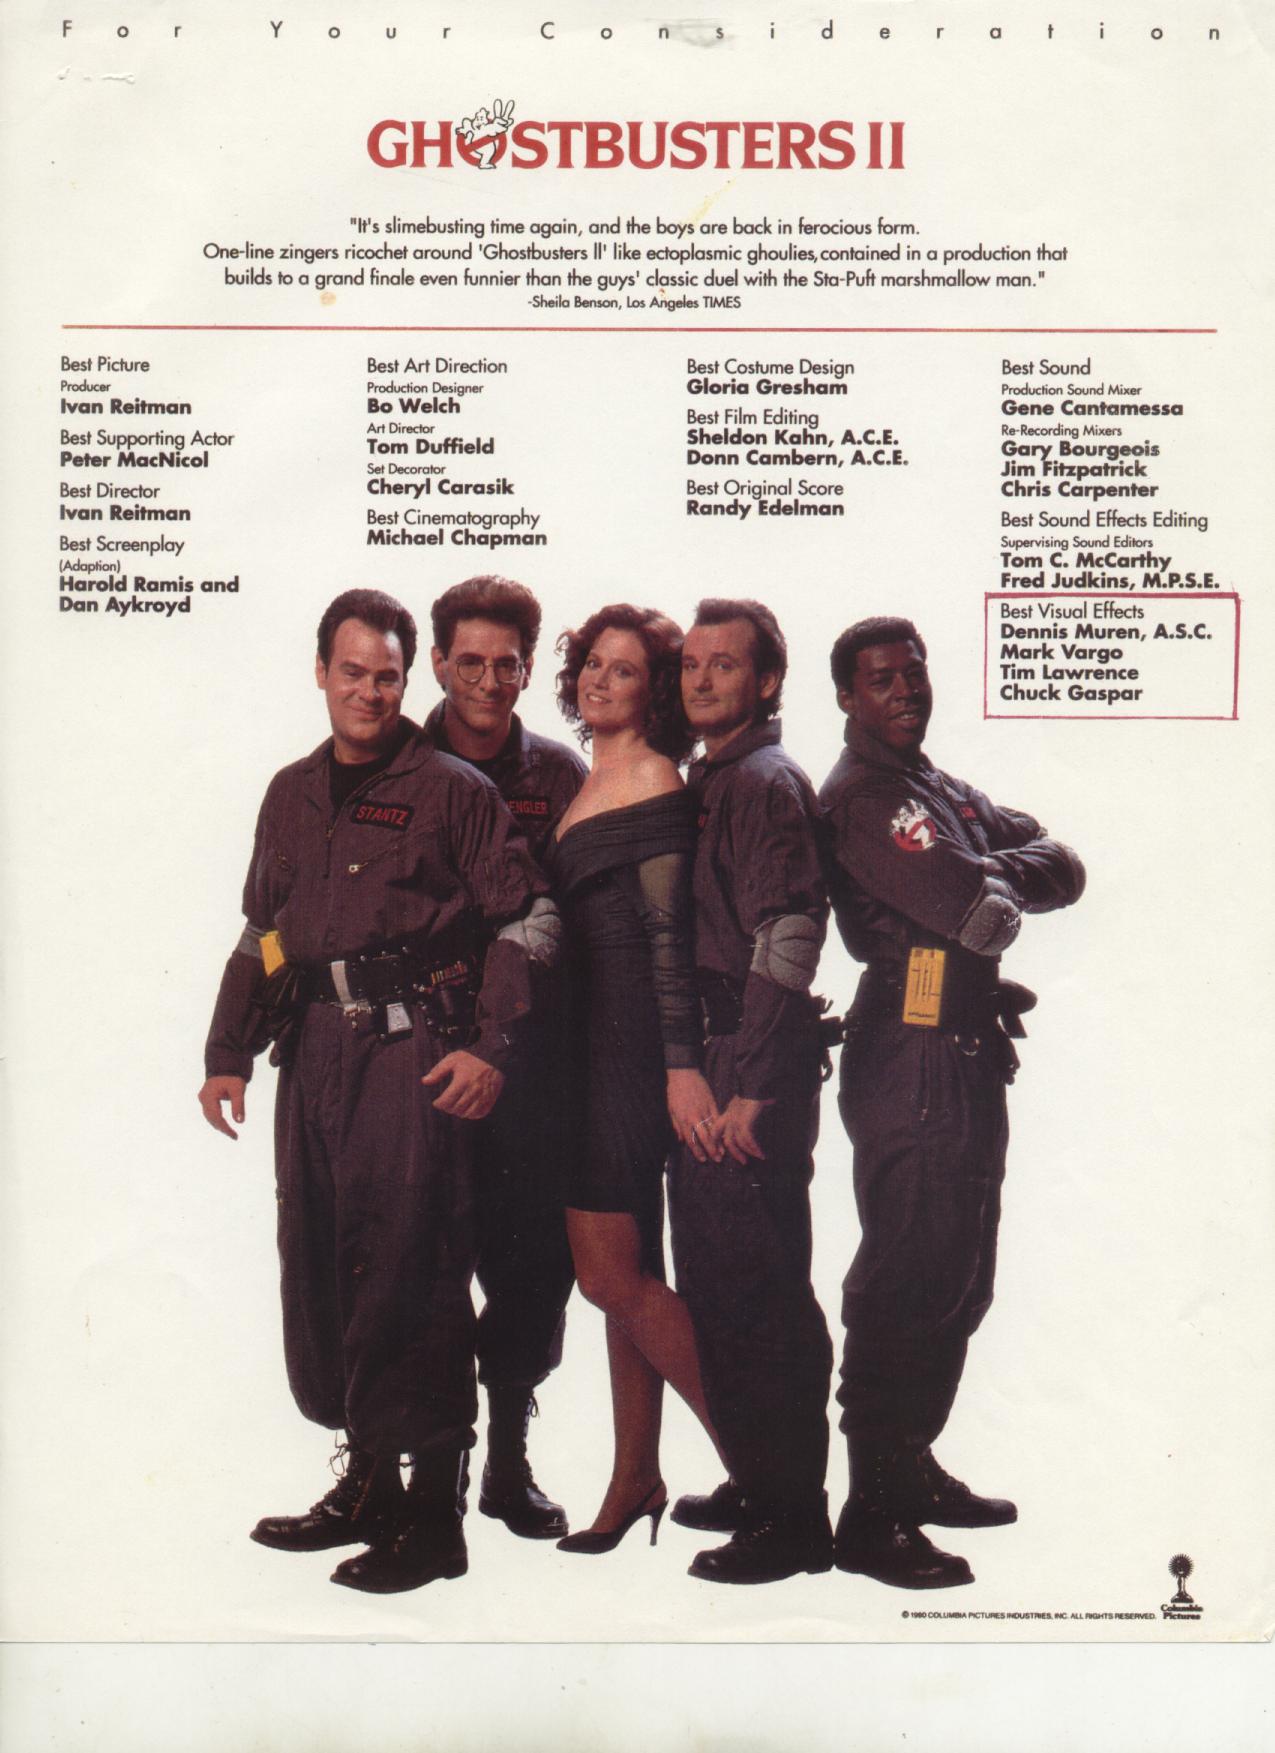 Ghostbusters 2 (1989) For my work on the show, Dennis Muren had me included on the Academy Submission and Columbia ran it full-page in 'The Hollywood Reporter' and 'Daily Variety'.